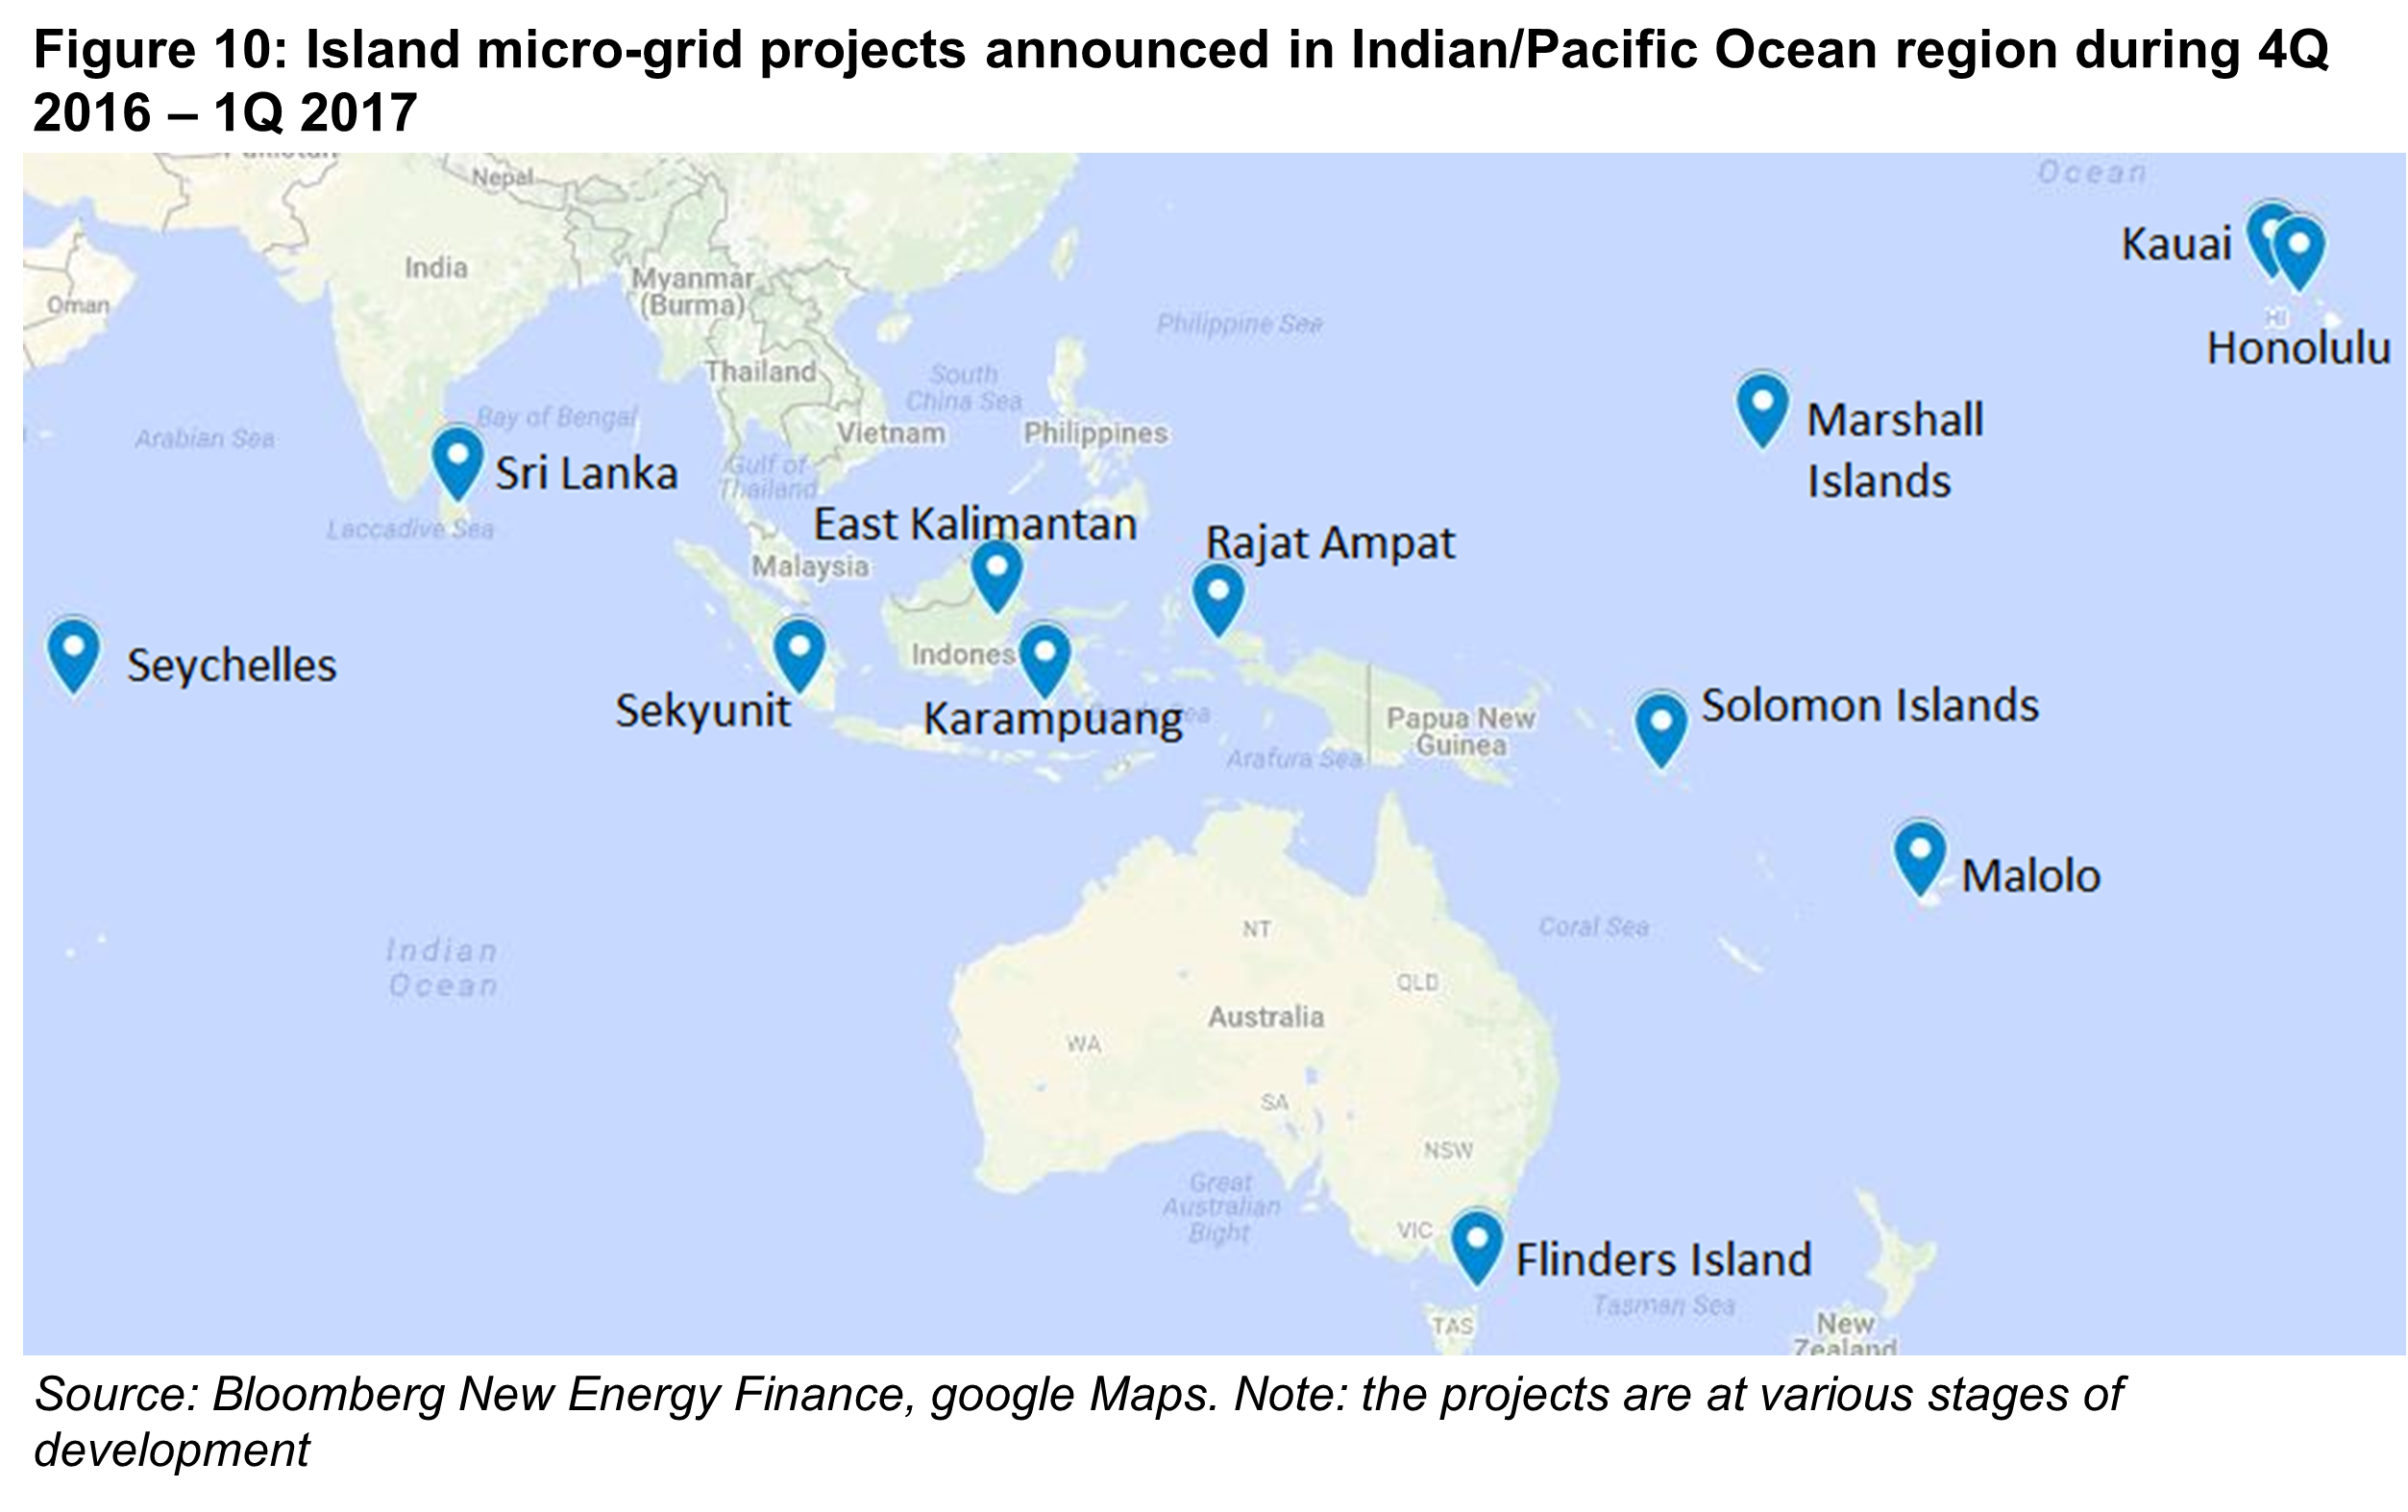 OG - Fig10 - Island micro-grid projects announced in Indian/Pacific Ocean region during 